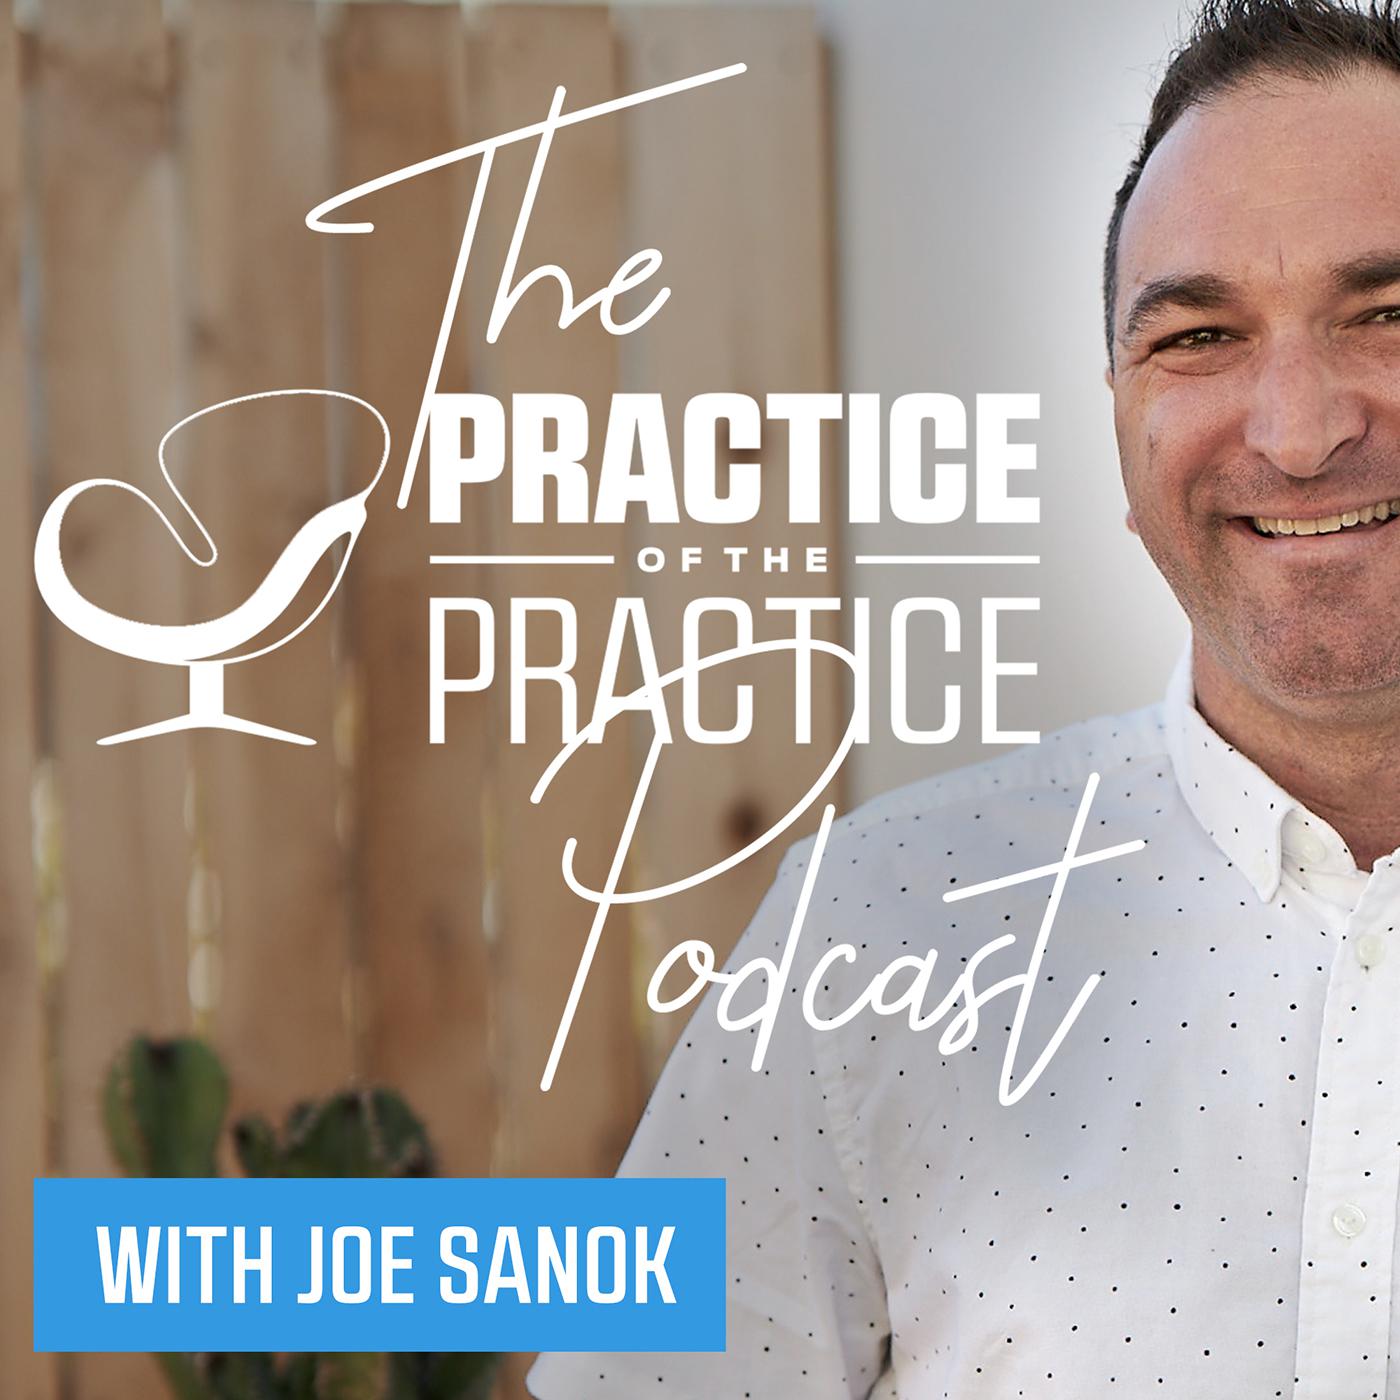 INTERVIEW | Don’t Be Afraid to be a Hypocrite, It Just Means Your Values Have Changes and You Are Accelerating in the Direction You Want on The Practice of the Practice Podcast